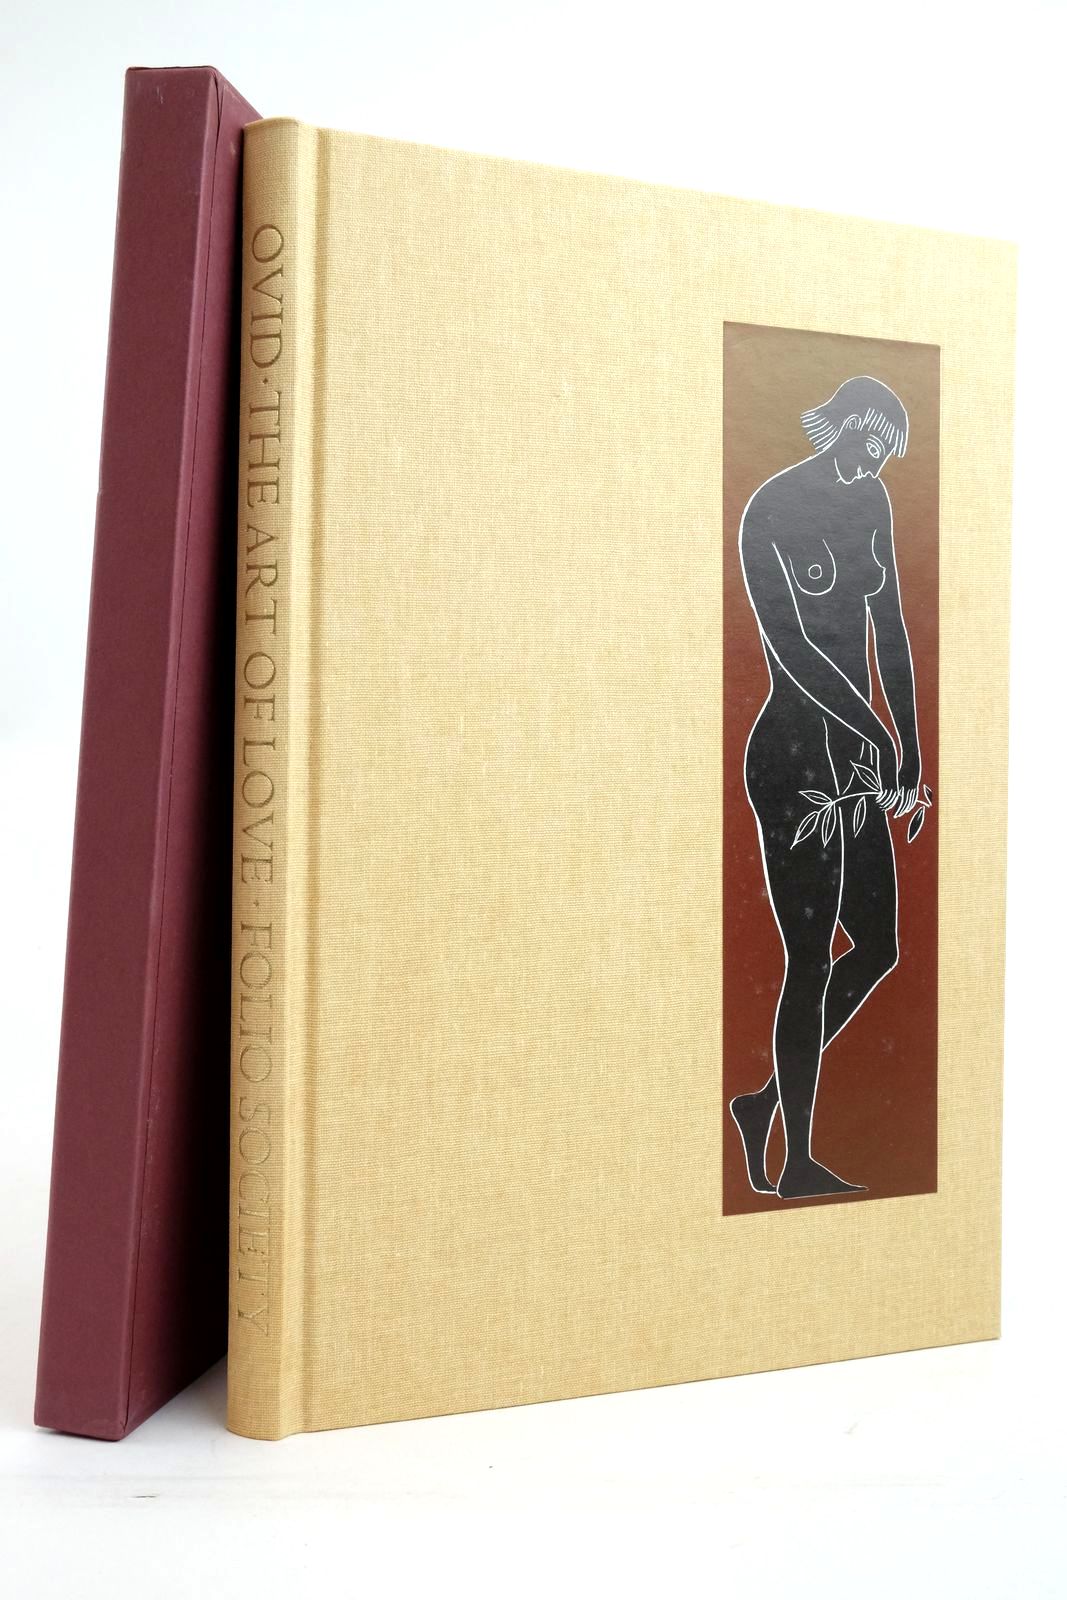 Photo of THE ART OF LOVE written by Ovid,  Naso, Publius Ovidius Michie, James illustrated by Baker, Grahame published by Folio Society (STOCK CODE: 2136223)  for sale by Stella & Rose's Books